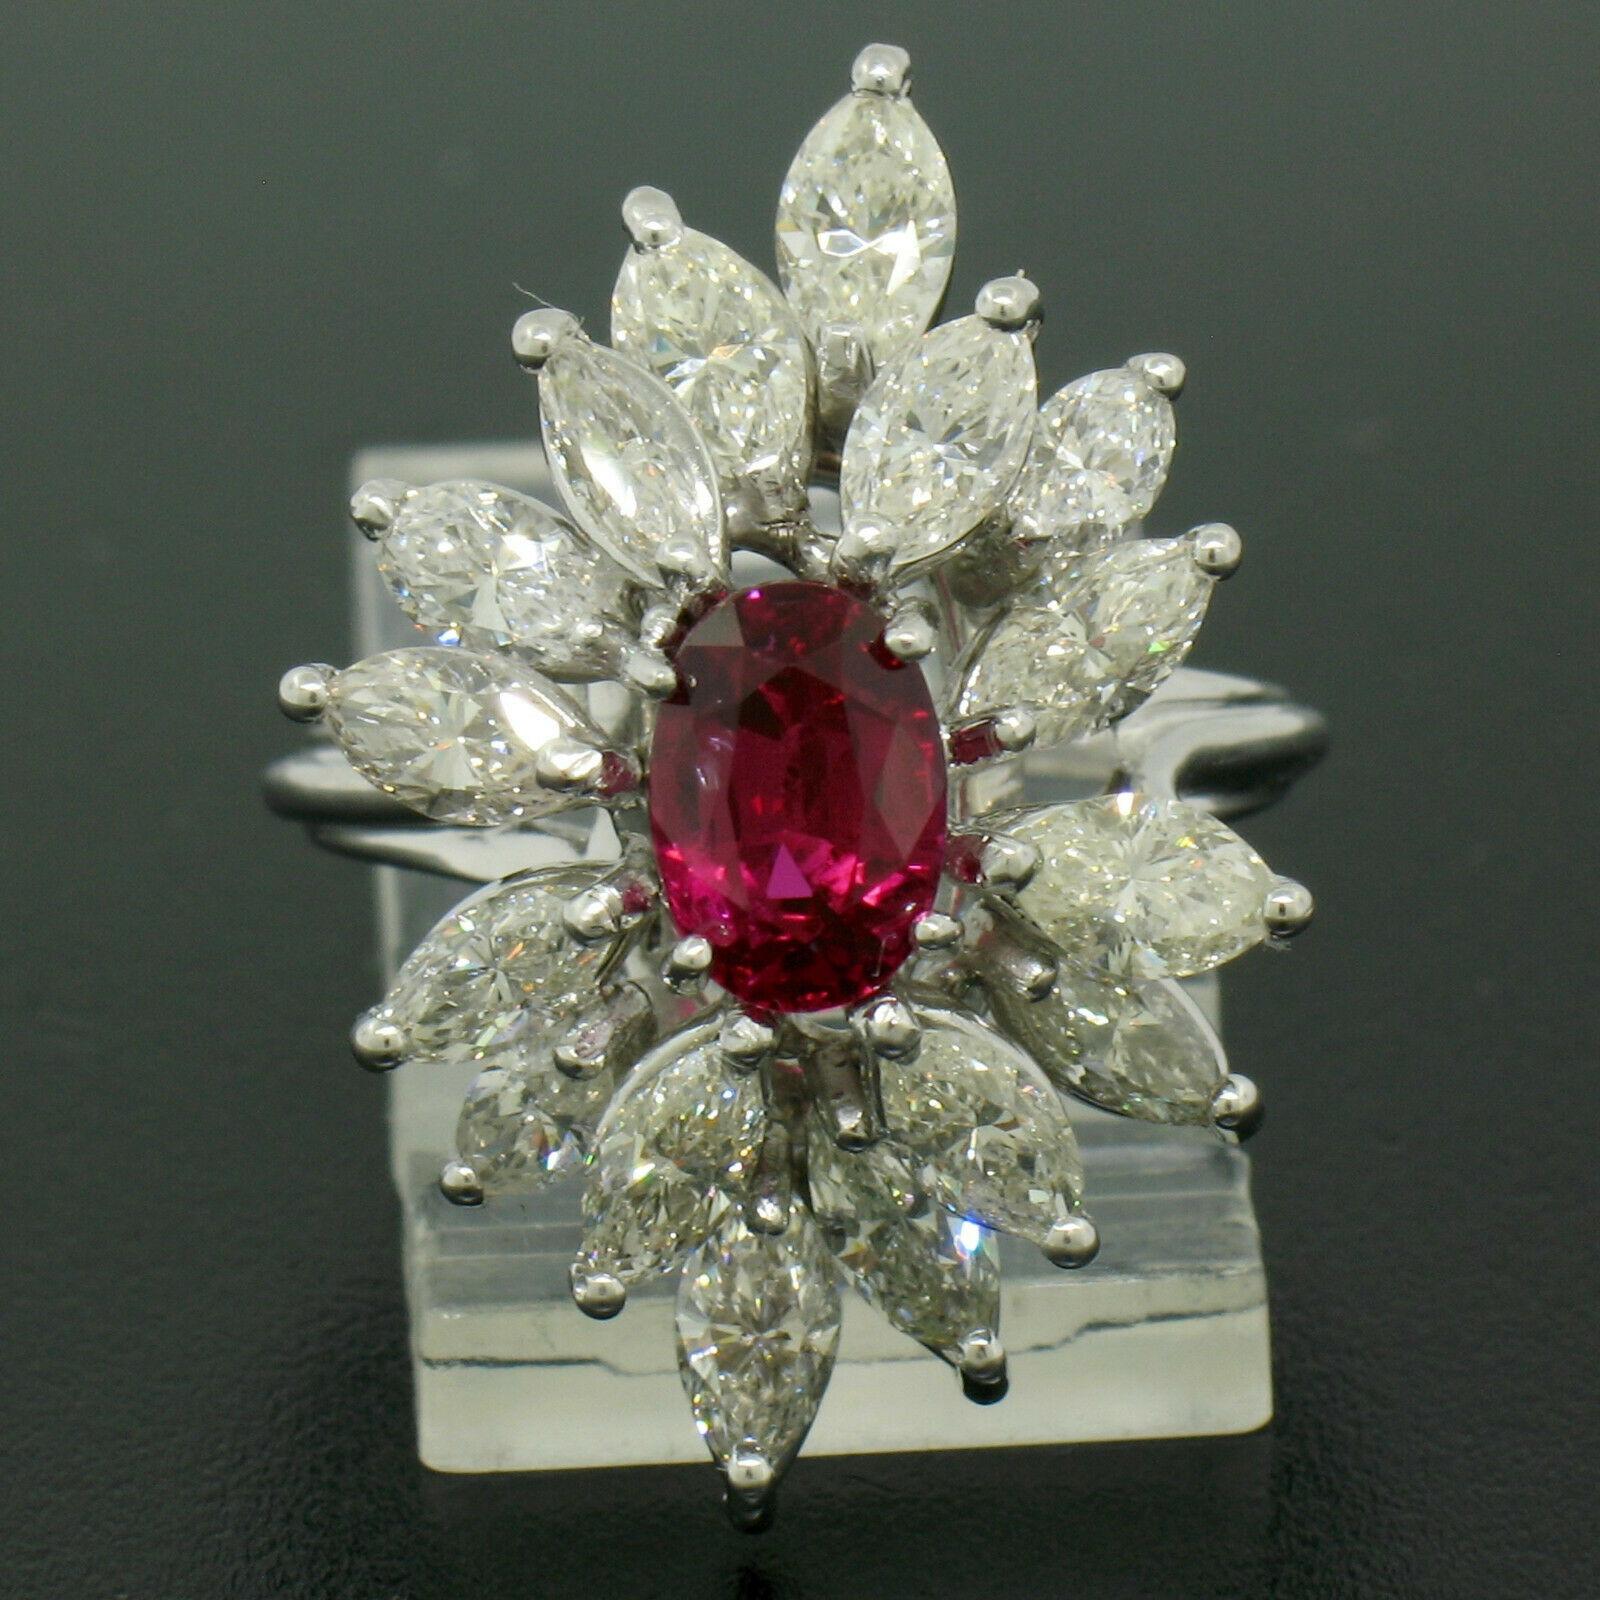 A truly breathtaking, GIA certified, genuine ruby ring crafted in solid 18k white gold featuring an oval cut ruby solitaire with an outstandingly rich and vivid red color. Marquise cut diamonds elegantly surround the center stone in a large cluster